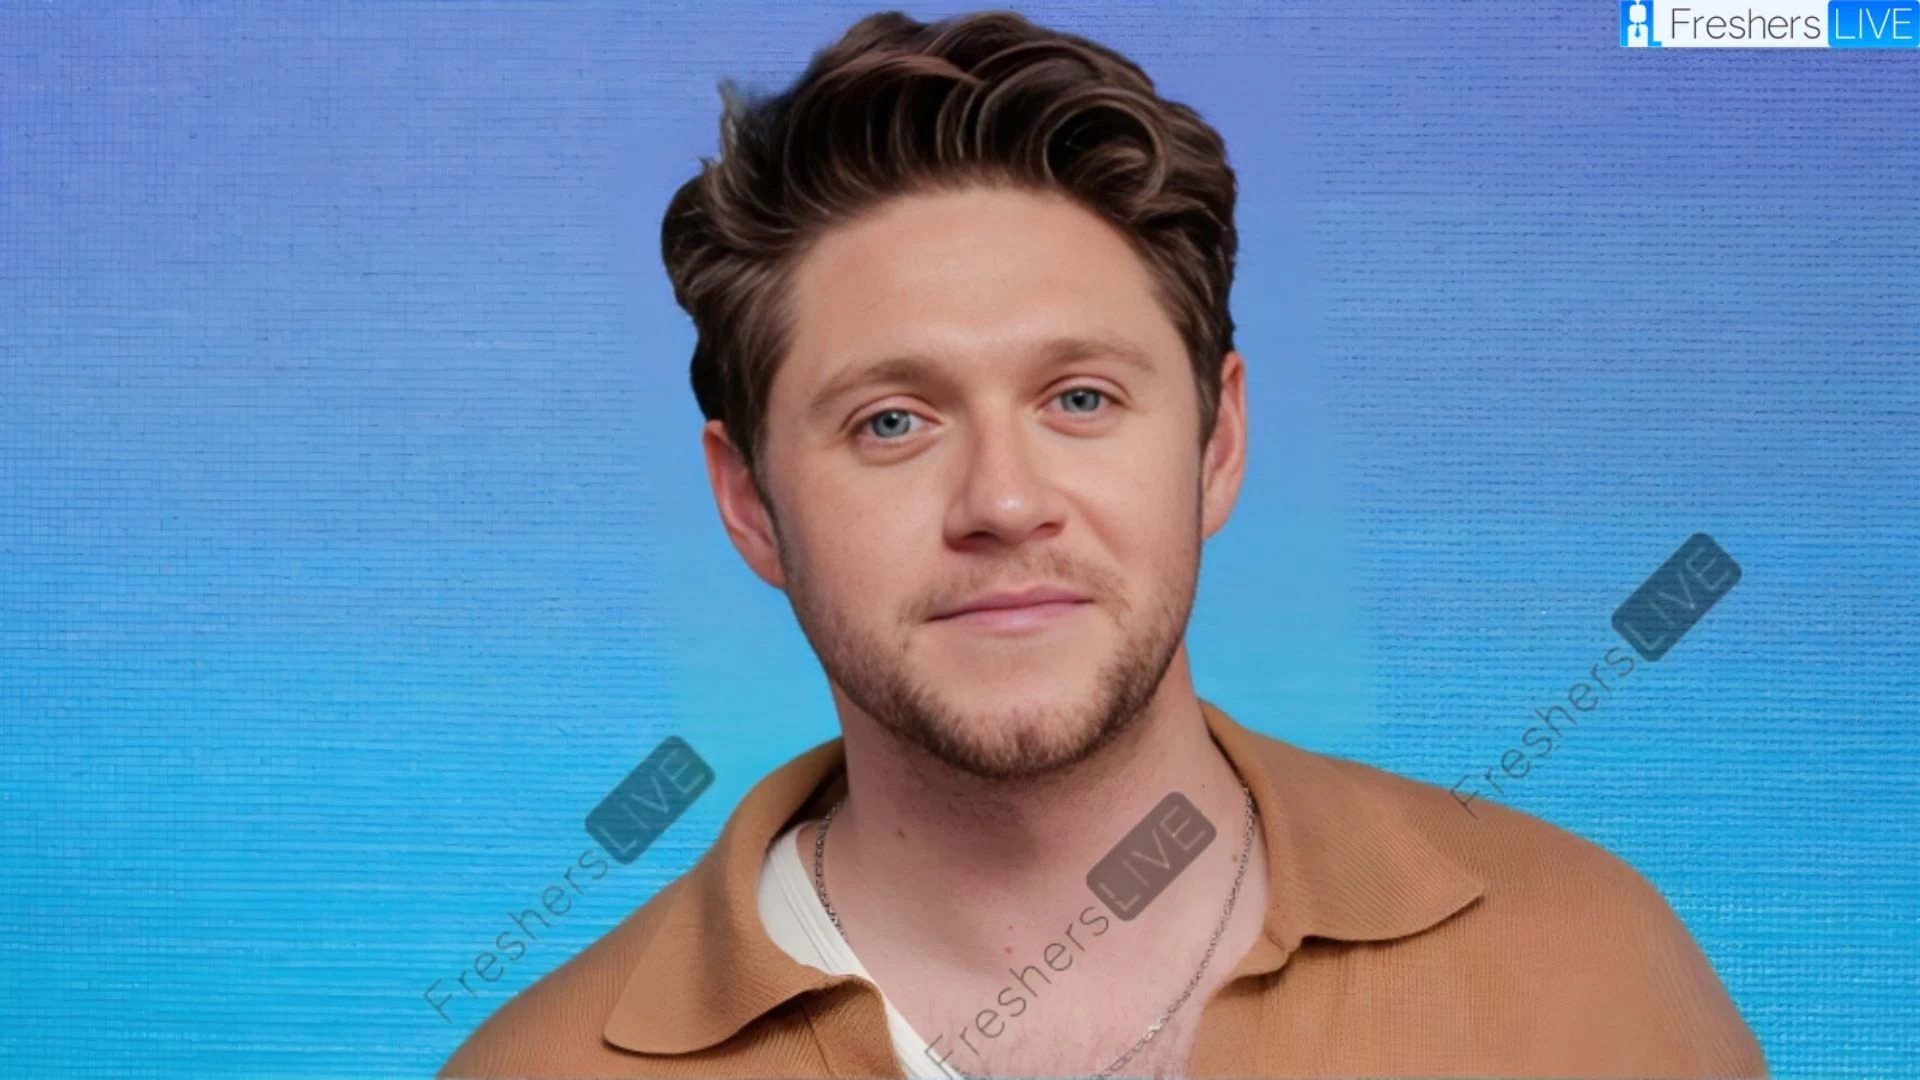 Niall Horan Ethnicity, What is Niall Horan's Ethnicity?